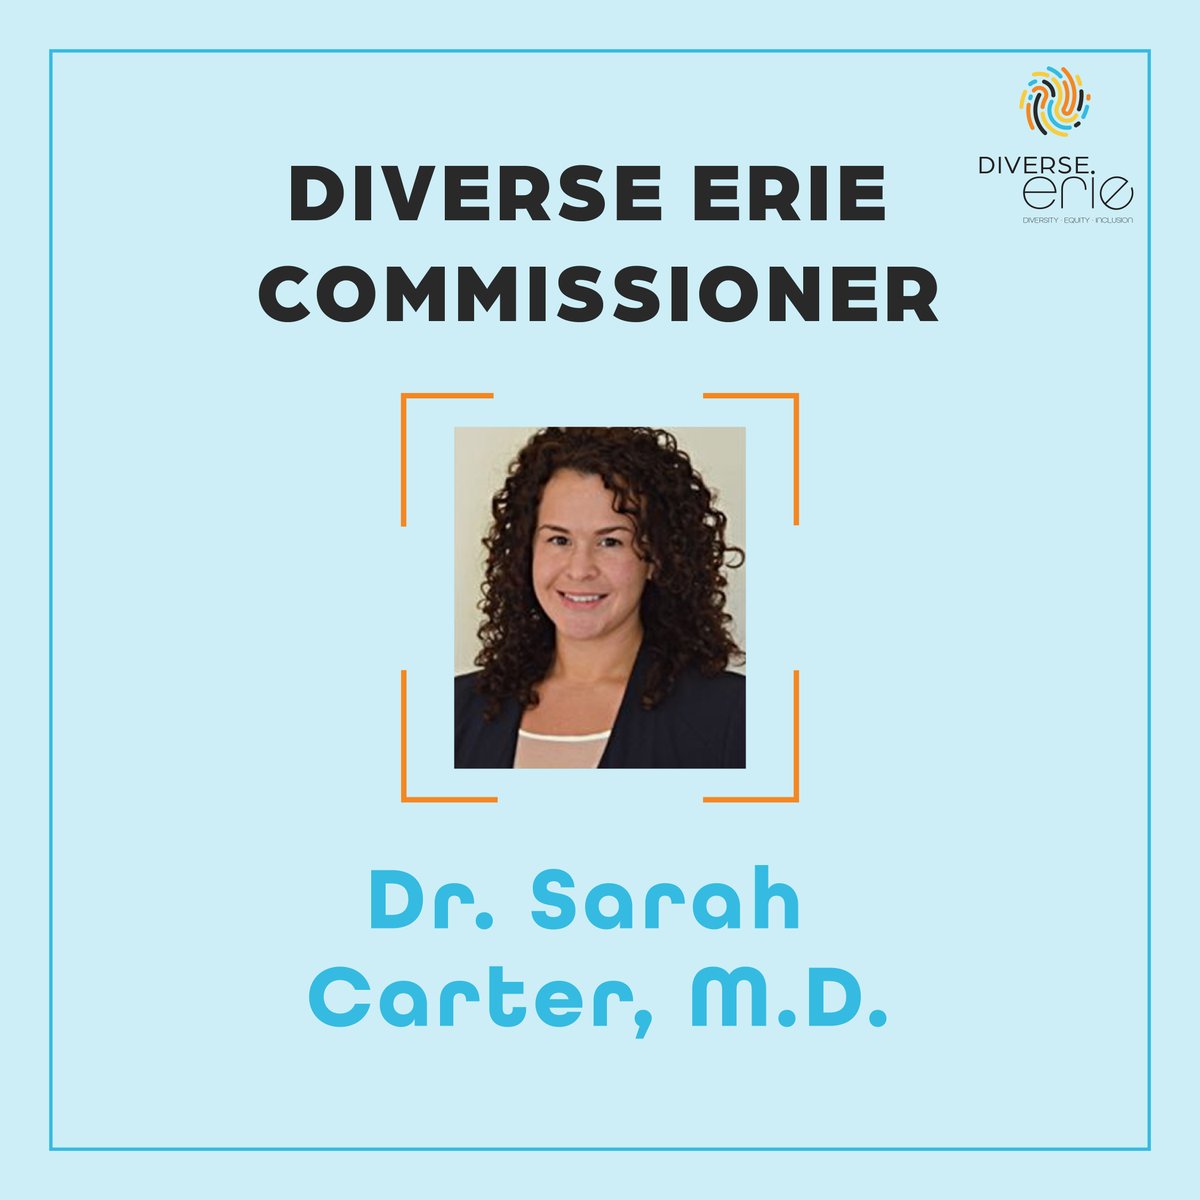 #CommissionerSpotlight Introducing #DiverseErie's Commissioner, Dr. Sarah Carter. Diverse Erie Commissioners work to invest in initiatives and ideas that advance equity and lift up our BIPOC community in #ErieCounty — Join us. diverseerie.org/2022/06/dr-sar…